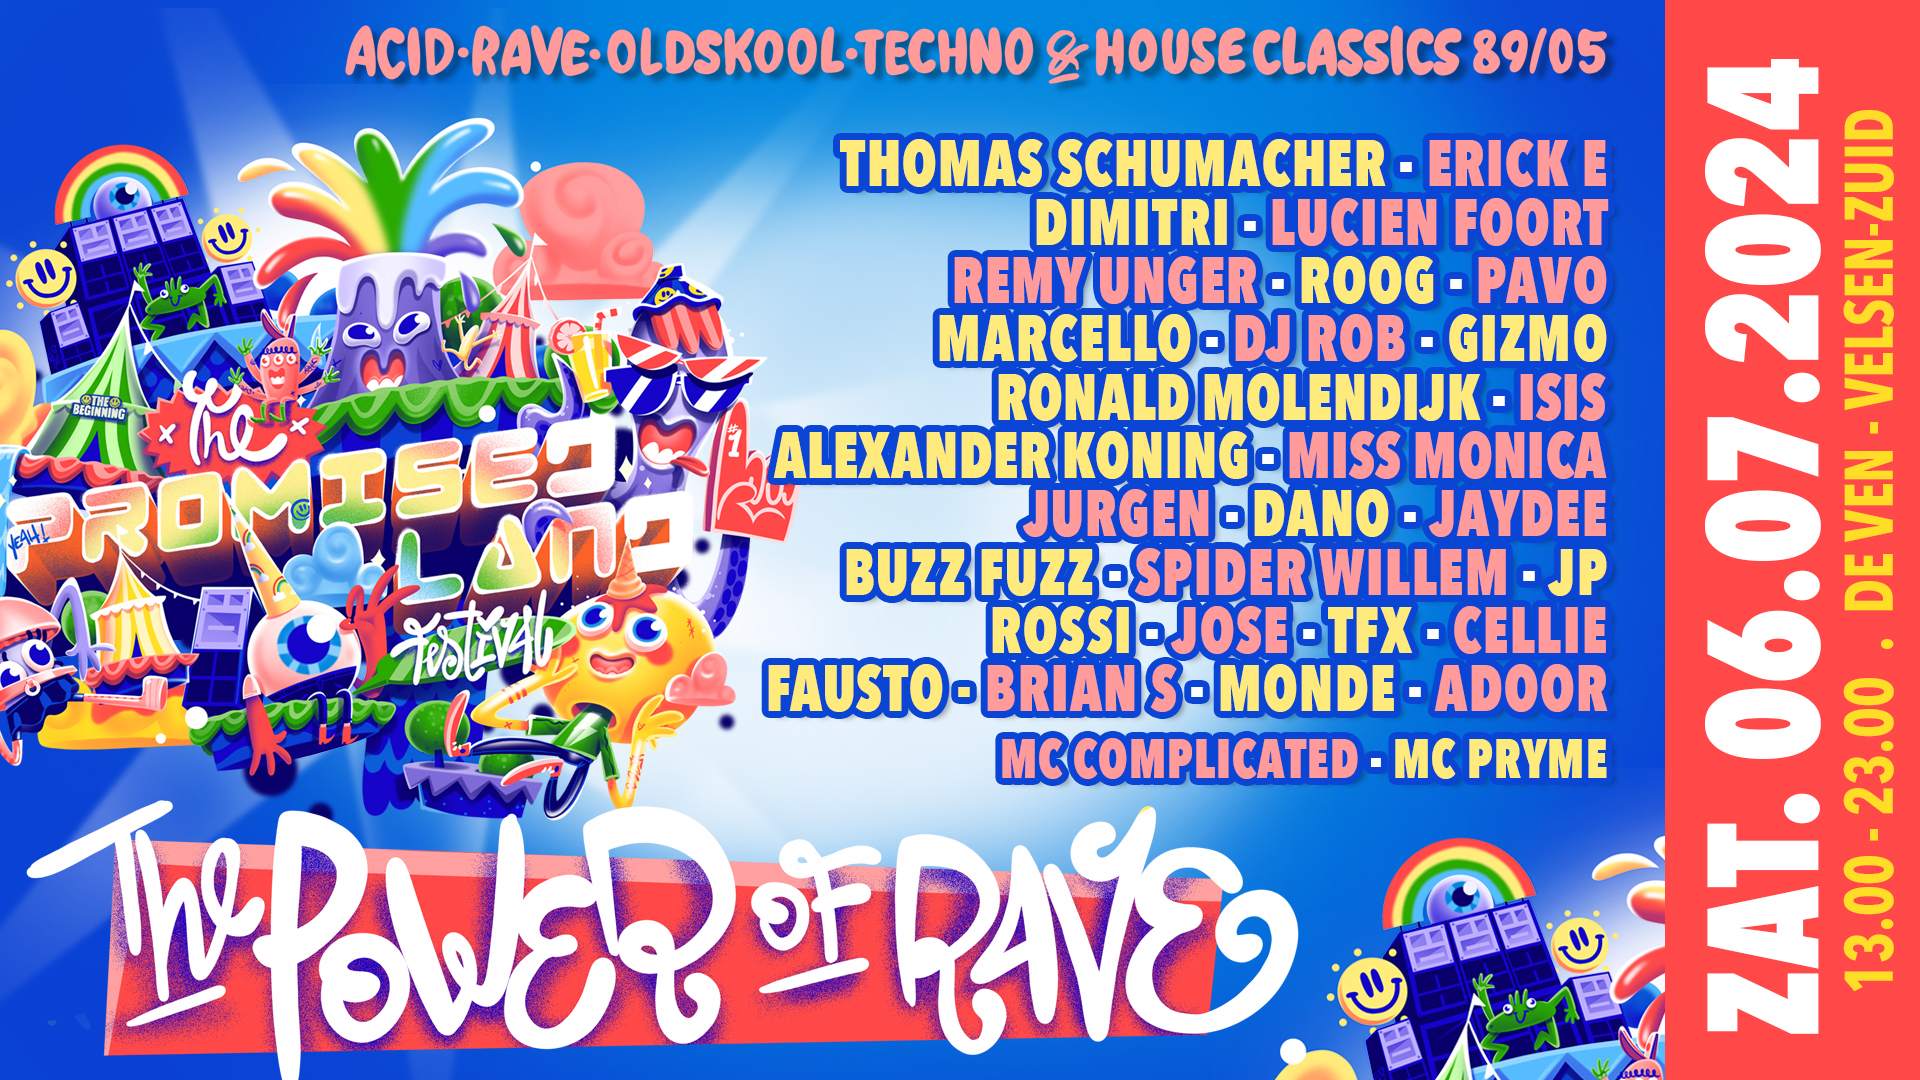 The Promised Land Festival 2024 - House, Rave, Oldstyle, Acid & techno Classics 89/05 - フライヤー表